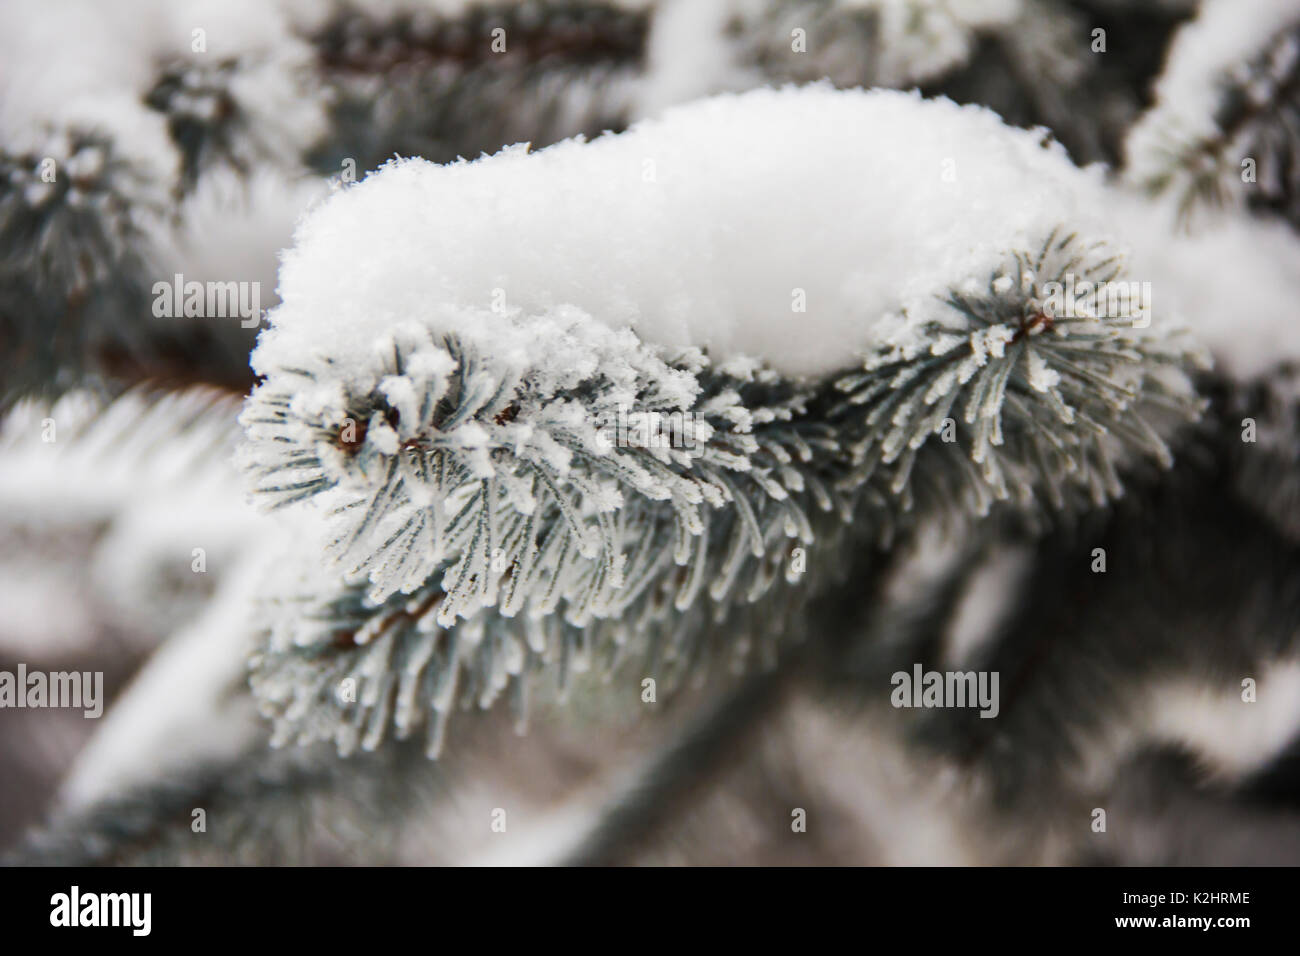 Spruce branches covered with snow, Branch of fir tree in snow, background Stock Photo